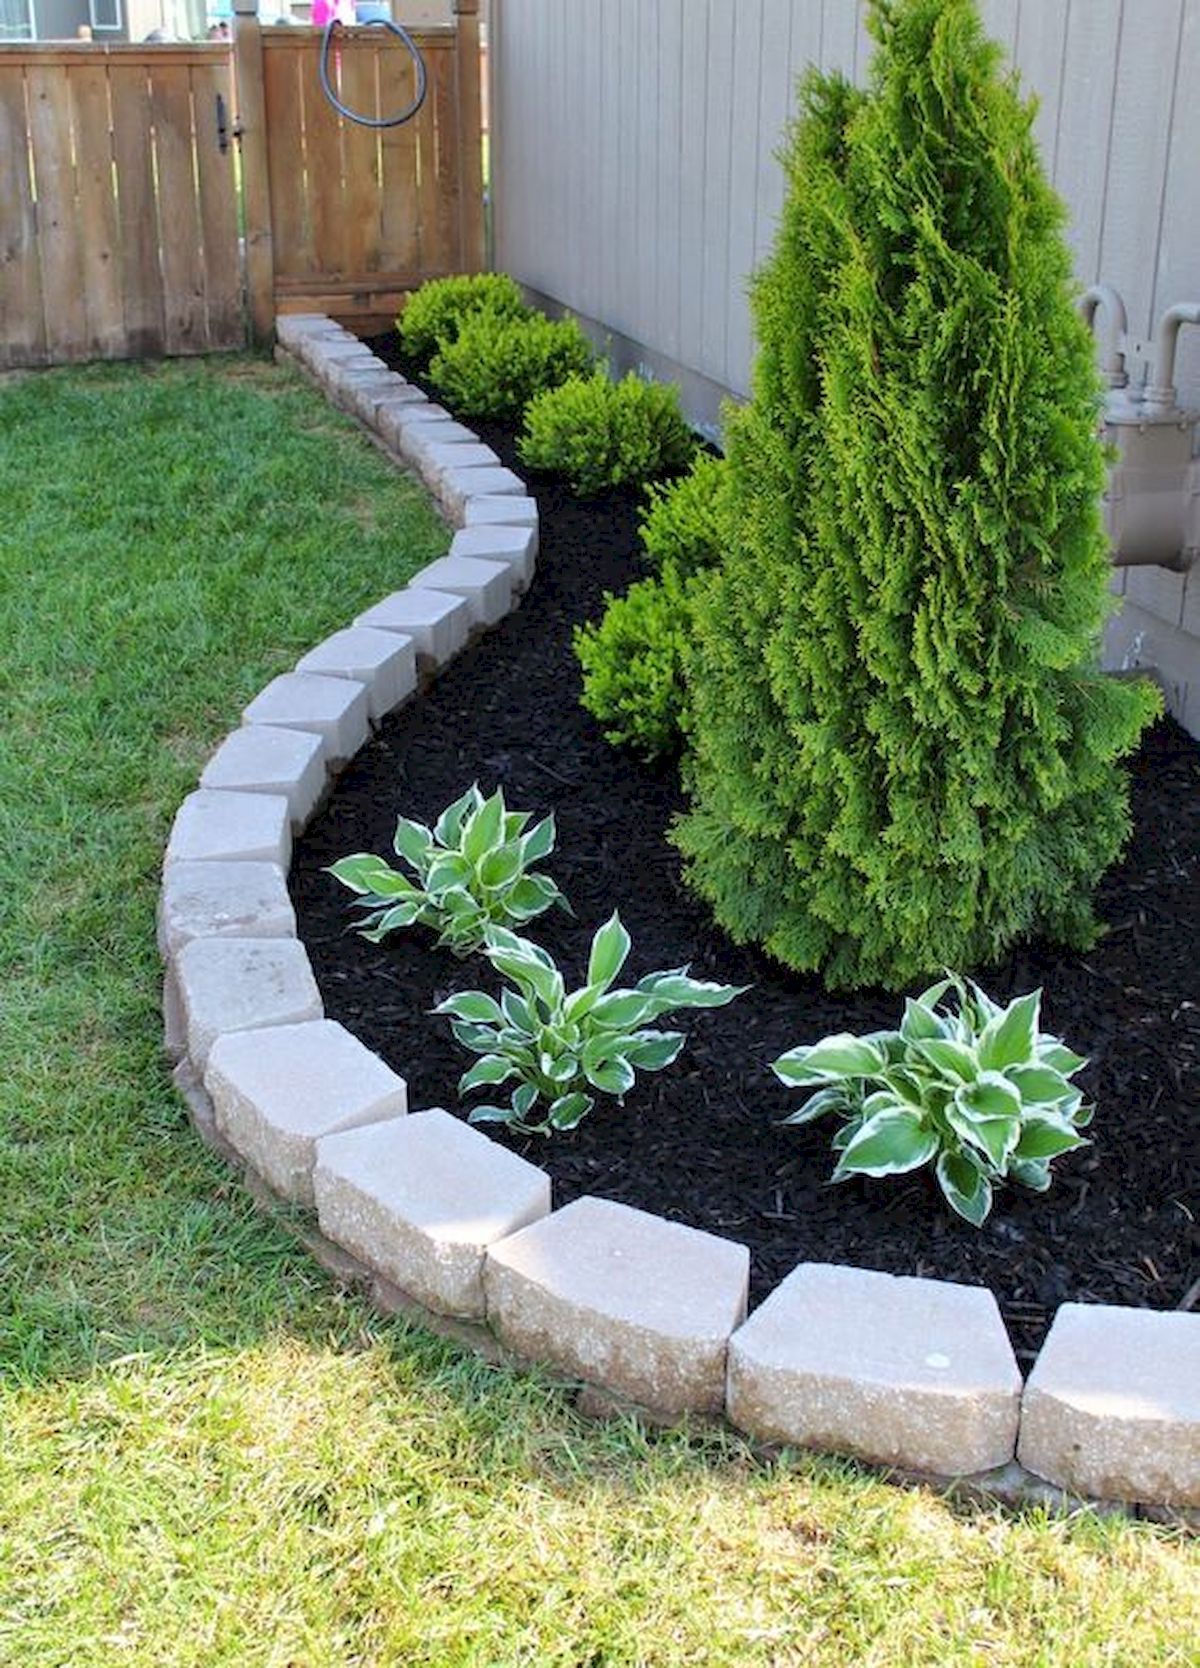 90 Simple and Beautiful Front Yard Landscaping Ideas on A Budget – LivingMarch.com